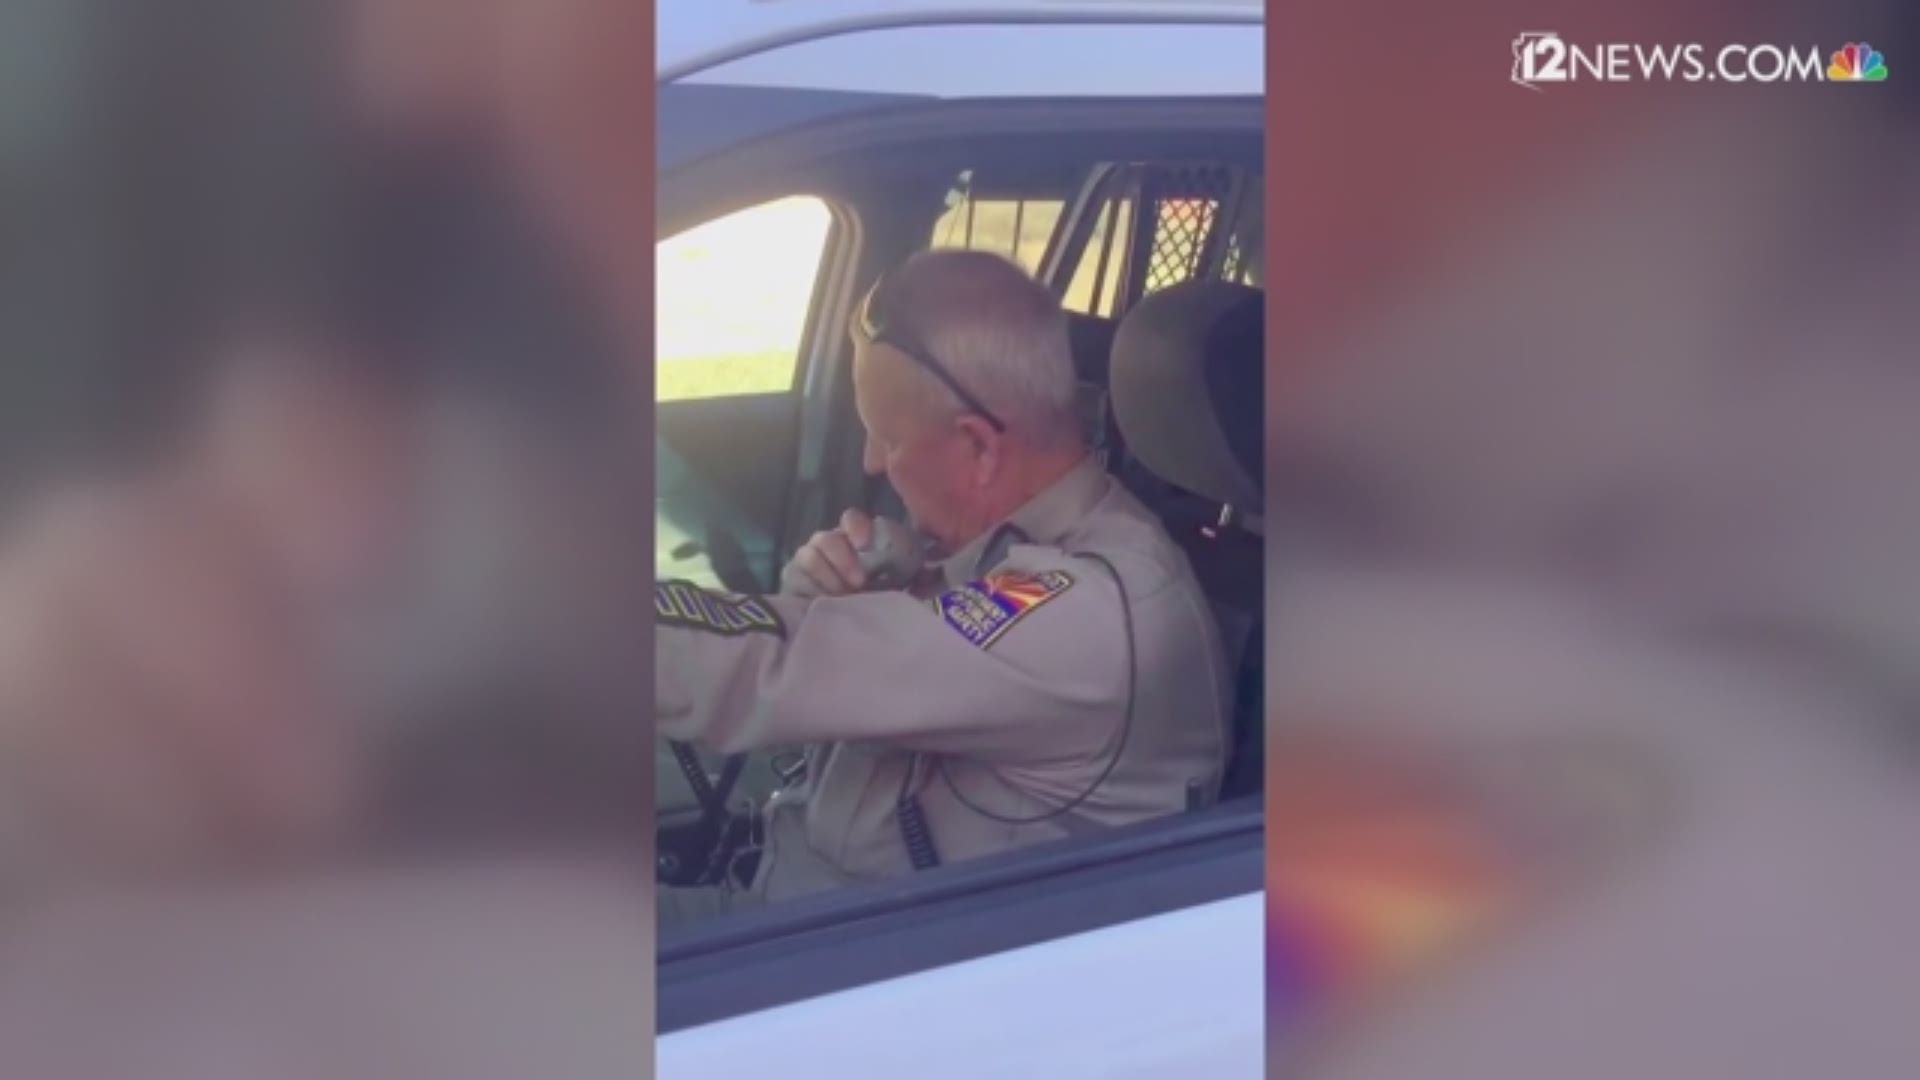 The last emotional call from an Arizona State Trooper. Video: Arizona Department of Public Safety and Rachel Gilberg